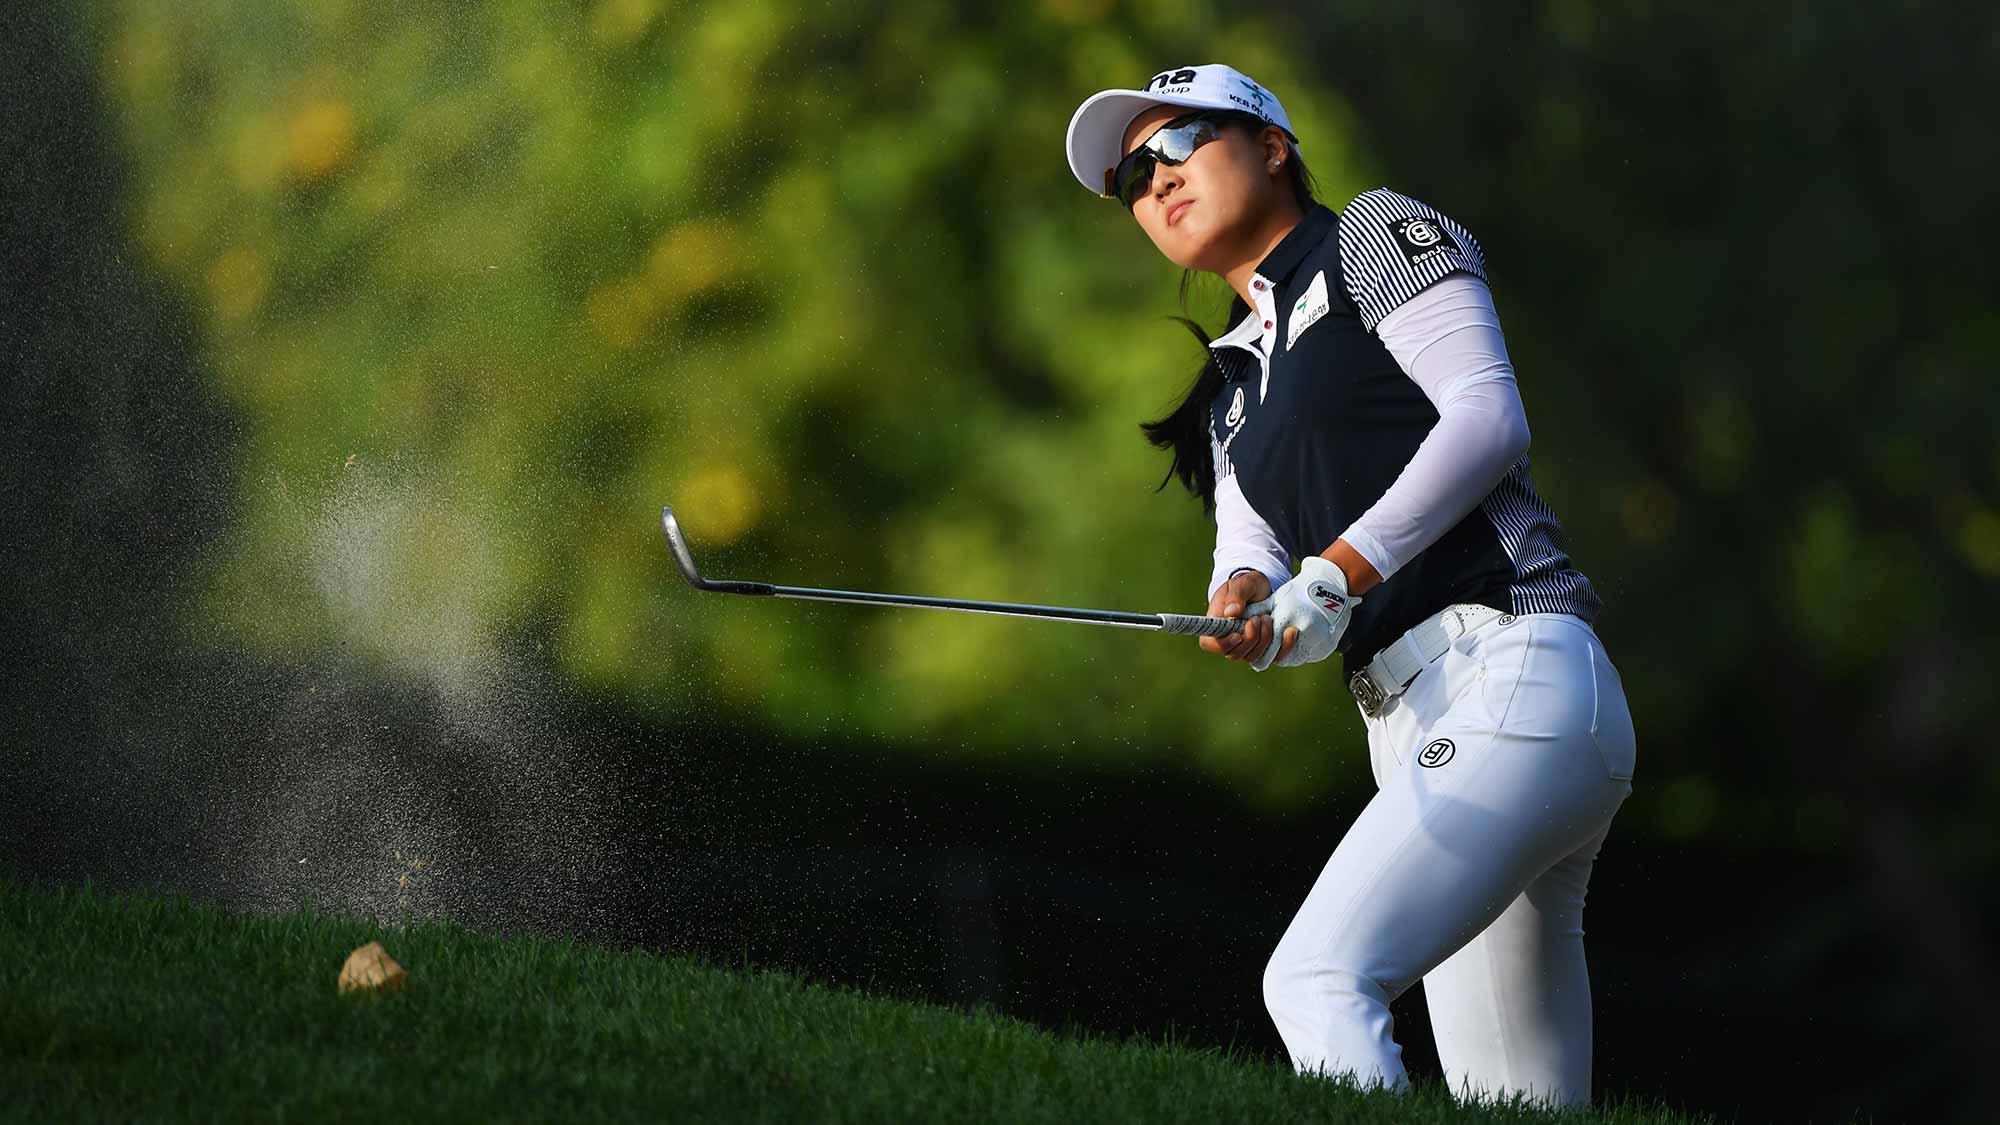 Minjee Lee of Australia plays from a bunker during day one of the Evian Championship at Evian Resort Golf Club on September 13, 2018 in Evian-les-Bains, France